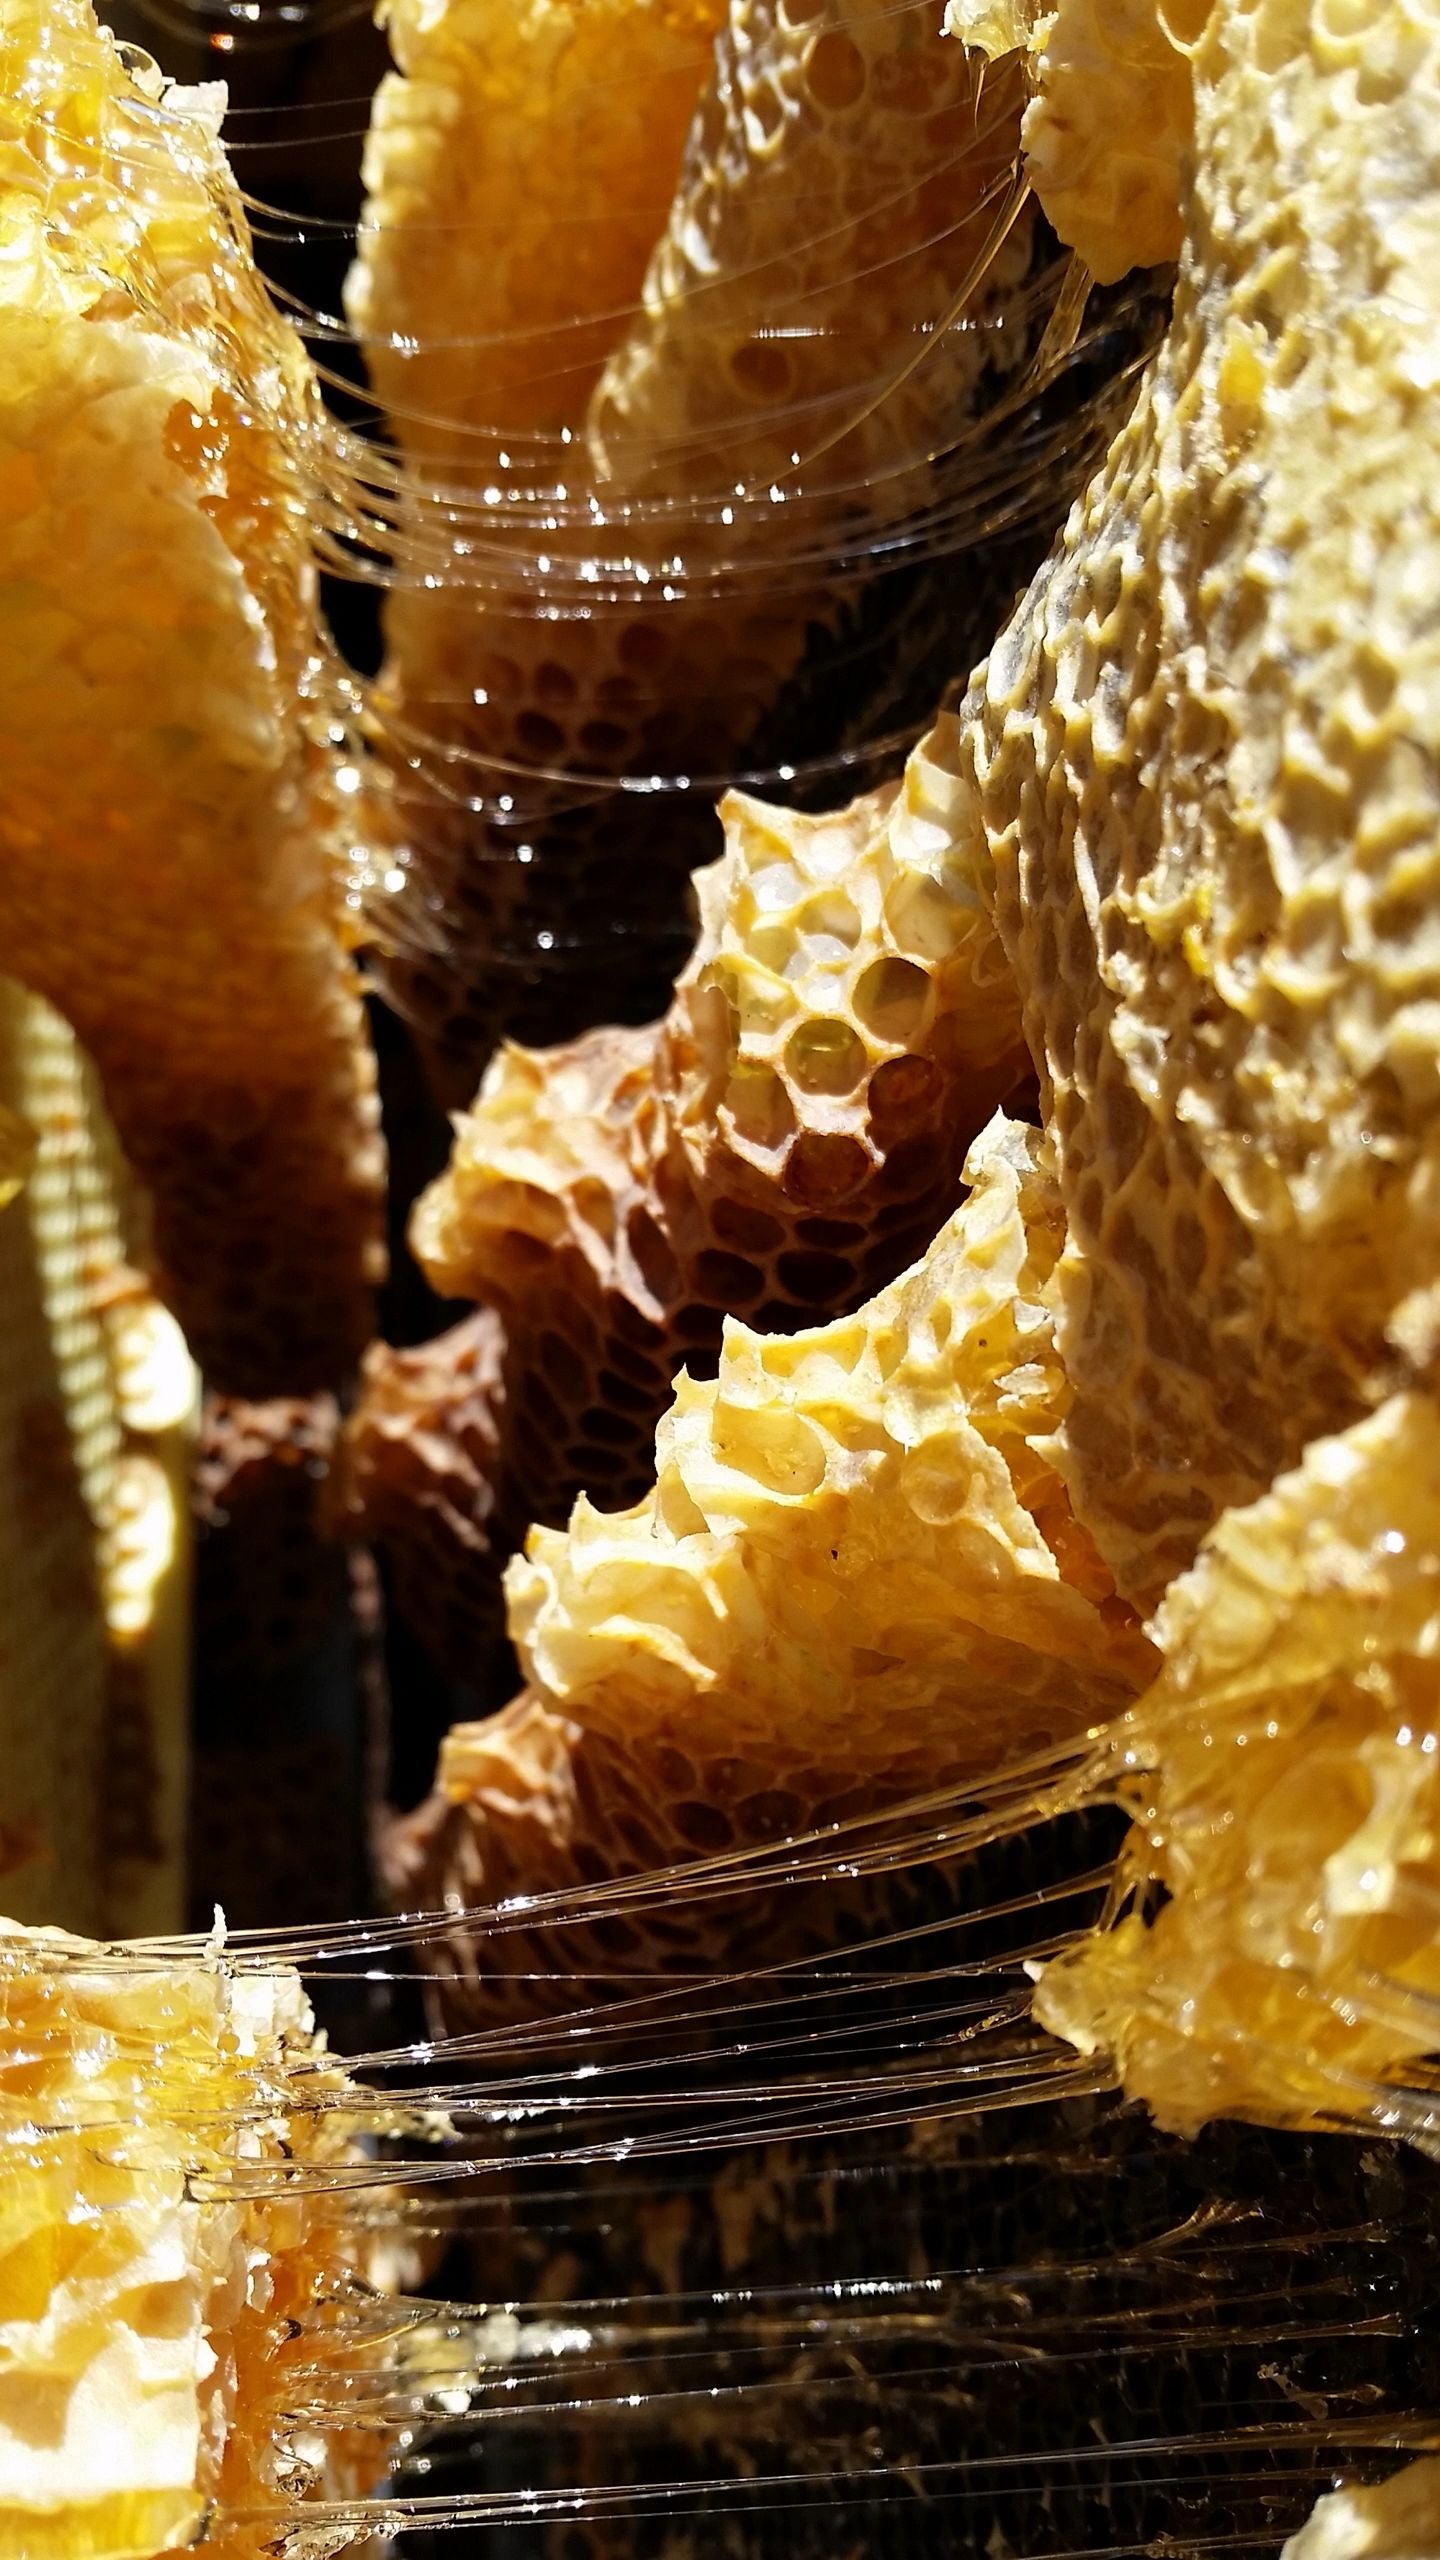 About Honeycomb